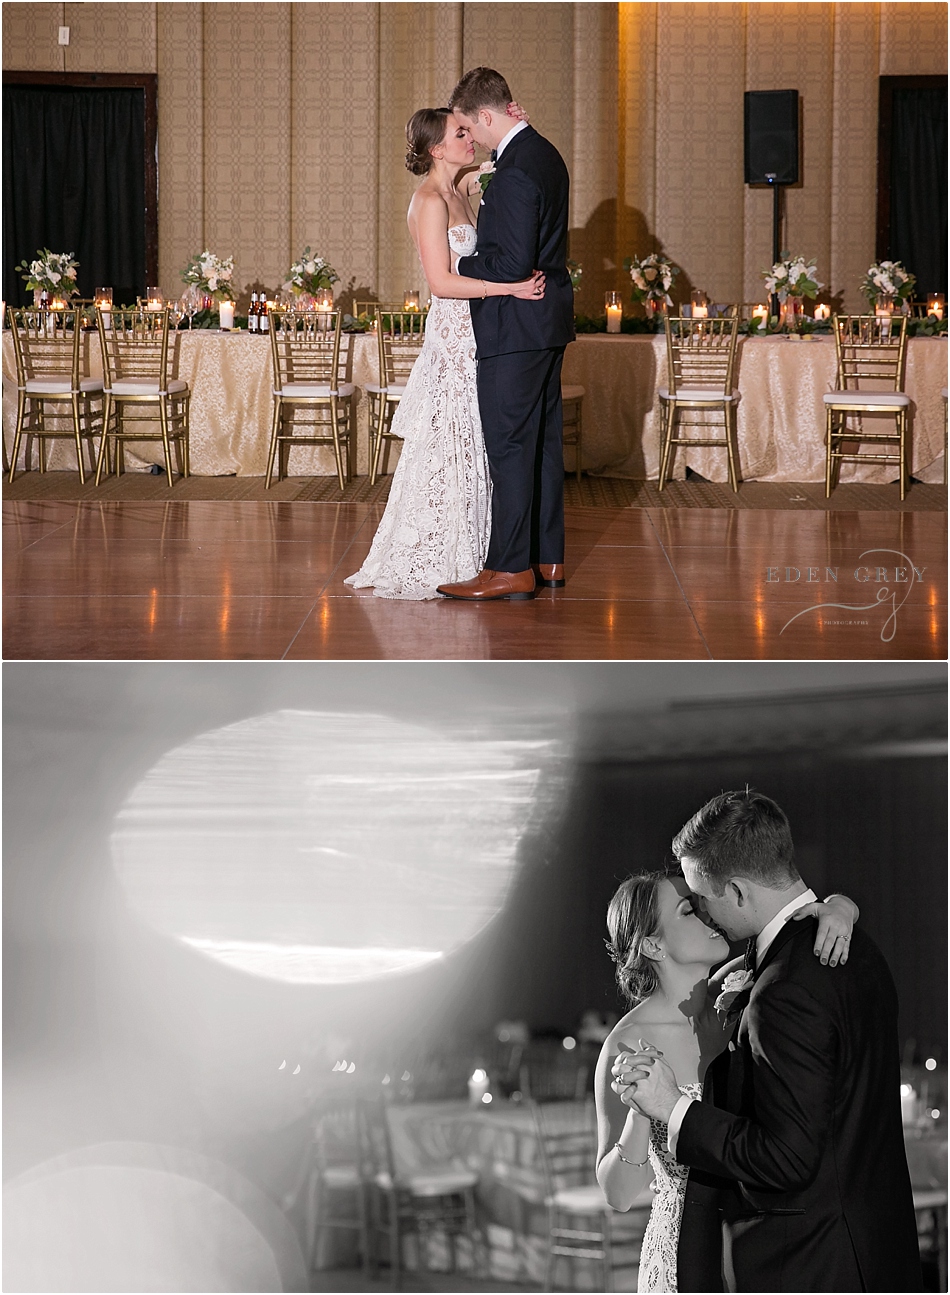 Private wedding dances at the end of the reception